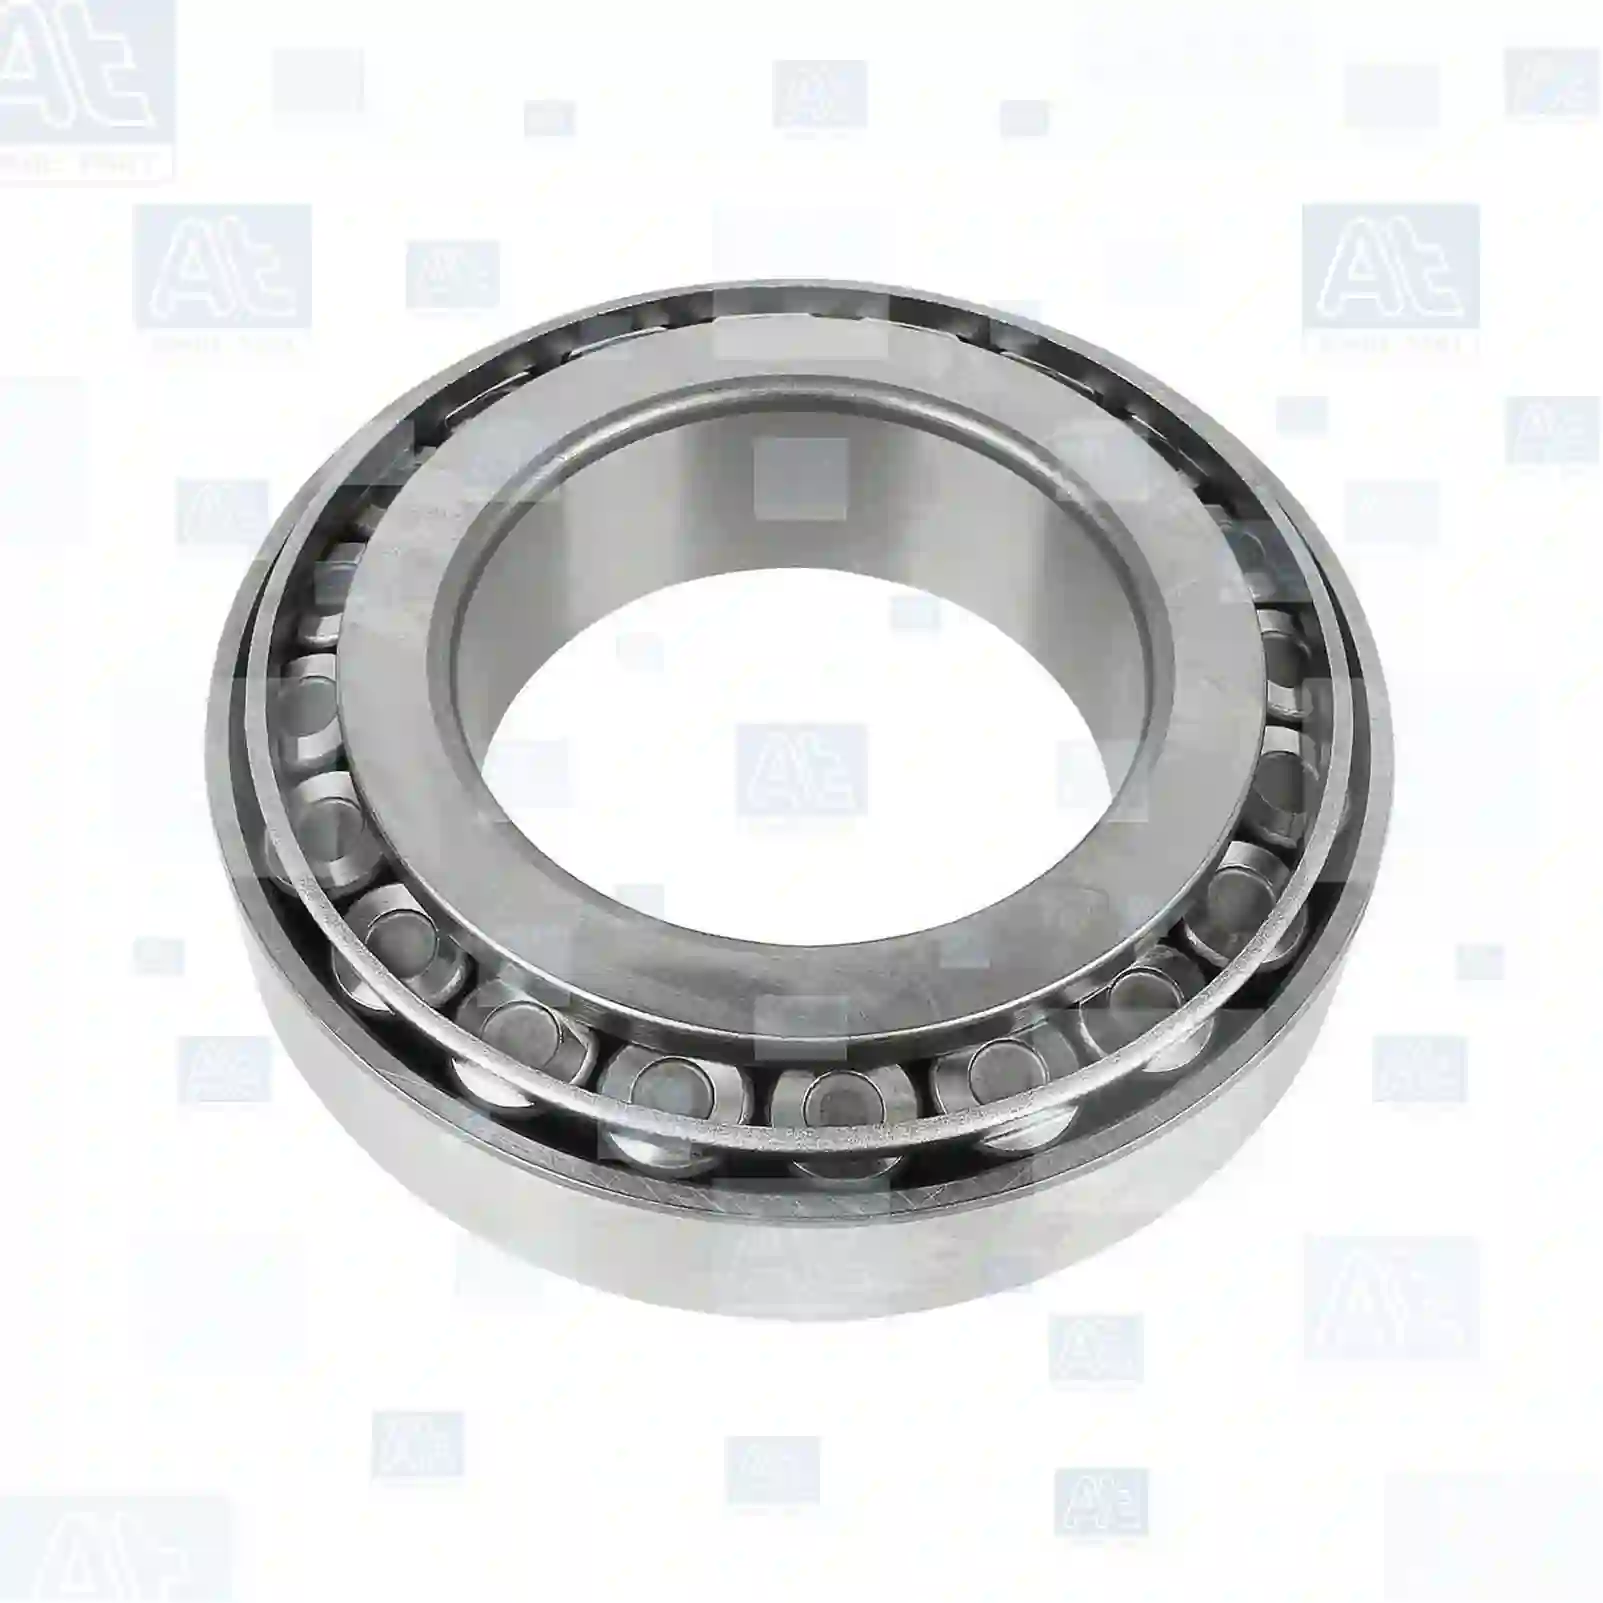 Tapered roller bearing, at no 77726329, oem no: 21040T, 07164544, 26800230, 988485104, 988485104A, 00914219, 01102862, 01905354, 07164544, 1905354, 26800230, 3612948500, 06324901600, 06324990007, 34934200004, 64934200101, 87523301210, 0009812205, 0029811705, 0029811805, 3279810405, 3279812205, MS556521, 40209-90000, 0023432217, 0959232217, 5000020511, 7401524857, 4200002500, 8064032217, 14146, EN568103, 97600-32217, 1524857, ZG03008-0008 At Spare Part | Engine, Accelerator Pedal, Camshaft, Connecting Rod, Crankcase, Crankshaft, Cylinder Head, Engine Suspension Mountings, Exhaust Manifold, Exhaust Gas Recirculation, Filter Kits, Flywheel Housing, General Overhaul Kits, Engine, Intake Manifold, Oil Cleaner, Oil Cooler, Oil Filter, Oil Pump, Oil Sump, Piston & Liner, Sensor & Switch, Timing Case, Turbocharger, Cooling System, Belt Tensioner, Coolant Filter, Coolant Pipe, Corrosion Prevention Agent, Drive, Expansion Tank, Fan, Intercooler, Monitors & Gauges, Radiator, Thermostat, V-Belt / Timing belt, Water Pump, Fuel System, Electronical Injector Unit, Feed Pump, Fuel Filter, cpl., Fuel Gauge Sender,  Fuel Line, Fuel Pump, Fuel Tank, Injection Line Kit, Injection Pump, Exhaust System, Clutch & Pedal, Gearbox, Propeller Shaft, Axles, Brake System, Hubs & Wheels, Suspension, Leaf Spring, Universal Parts / Accessories, Steering, Electrical System, Cabin Tapered roller bearing, at no 77726329, oem no: 21040T, 07164544, 26800230, 988485104, 988485104A, 00914219, 01102862, 01905354, 07164544, 1905354, 26800230, 3612948500, 06324901600, 06324990007, 34934200004, 64934200101, 87523301210, 0009812205, 0029811705, 0029811805, 3279810405, 3279812205, MS556521, 40209-90000, 0023432217, 0959232217, 5000020511, 7401524857, 4200002500, 8064032217, 14146, EN568103, 97600-32217, 1524857, ZG03008-0008 At Spare Part | Engine, Accelerator Pedal, Camshaft, Connecting Rod, Crankcase, Crankshaft, Cylinder Head, Engine Suspension Mountings, Exhaust Manifold, Exhaust Gas Recirculation, Filter Kits, Flywheel Housing, General Overhaul Kits, Engine, Intake Manifold, Oil Cleaner, Oil Cooler, Oil Filter, Oil Pump, Oil Sump, Piston & Liner, Sensor & Switch, Timing Case, Turbocharger, Cooling System, Belt Tensioner, Coolant Filter, Coolant Pipe, Corrosion Prevention Agent, Drive, Expansion Tank, Fan, Intercooler, Monitors & Gauges, Radiator, Thermostat, V-Belt / Timing belt, Water Pump, Fuel System, Electronical Injector Unit, Feed Pump, Fuel Filter, cpl., Fuel Gauge Sender,  Fuel Line, Fuel Pump, Fuel Tank, Injection Line Kit, Injection Pump, Exhaust System, Clutch & Pedal, Gearbox, Propeller Shaft, Axles, Brake System, Hubs & Wheels, Suspension, Leaf Spring, Universal Parts / Accessories, Steering, Electrical System, Cabin